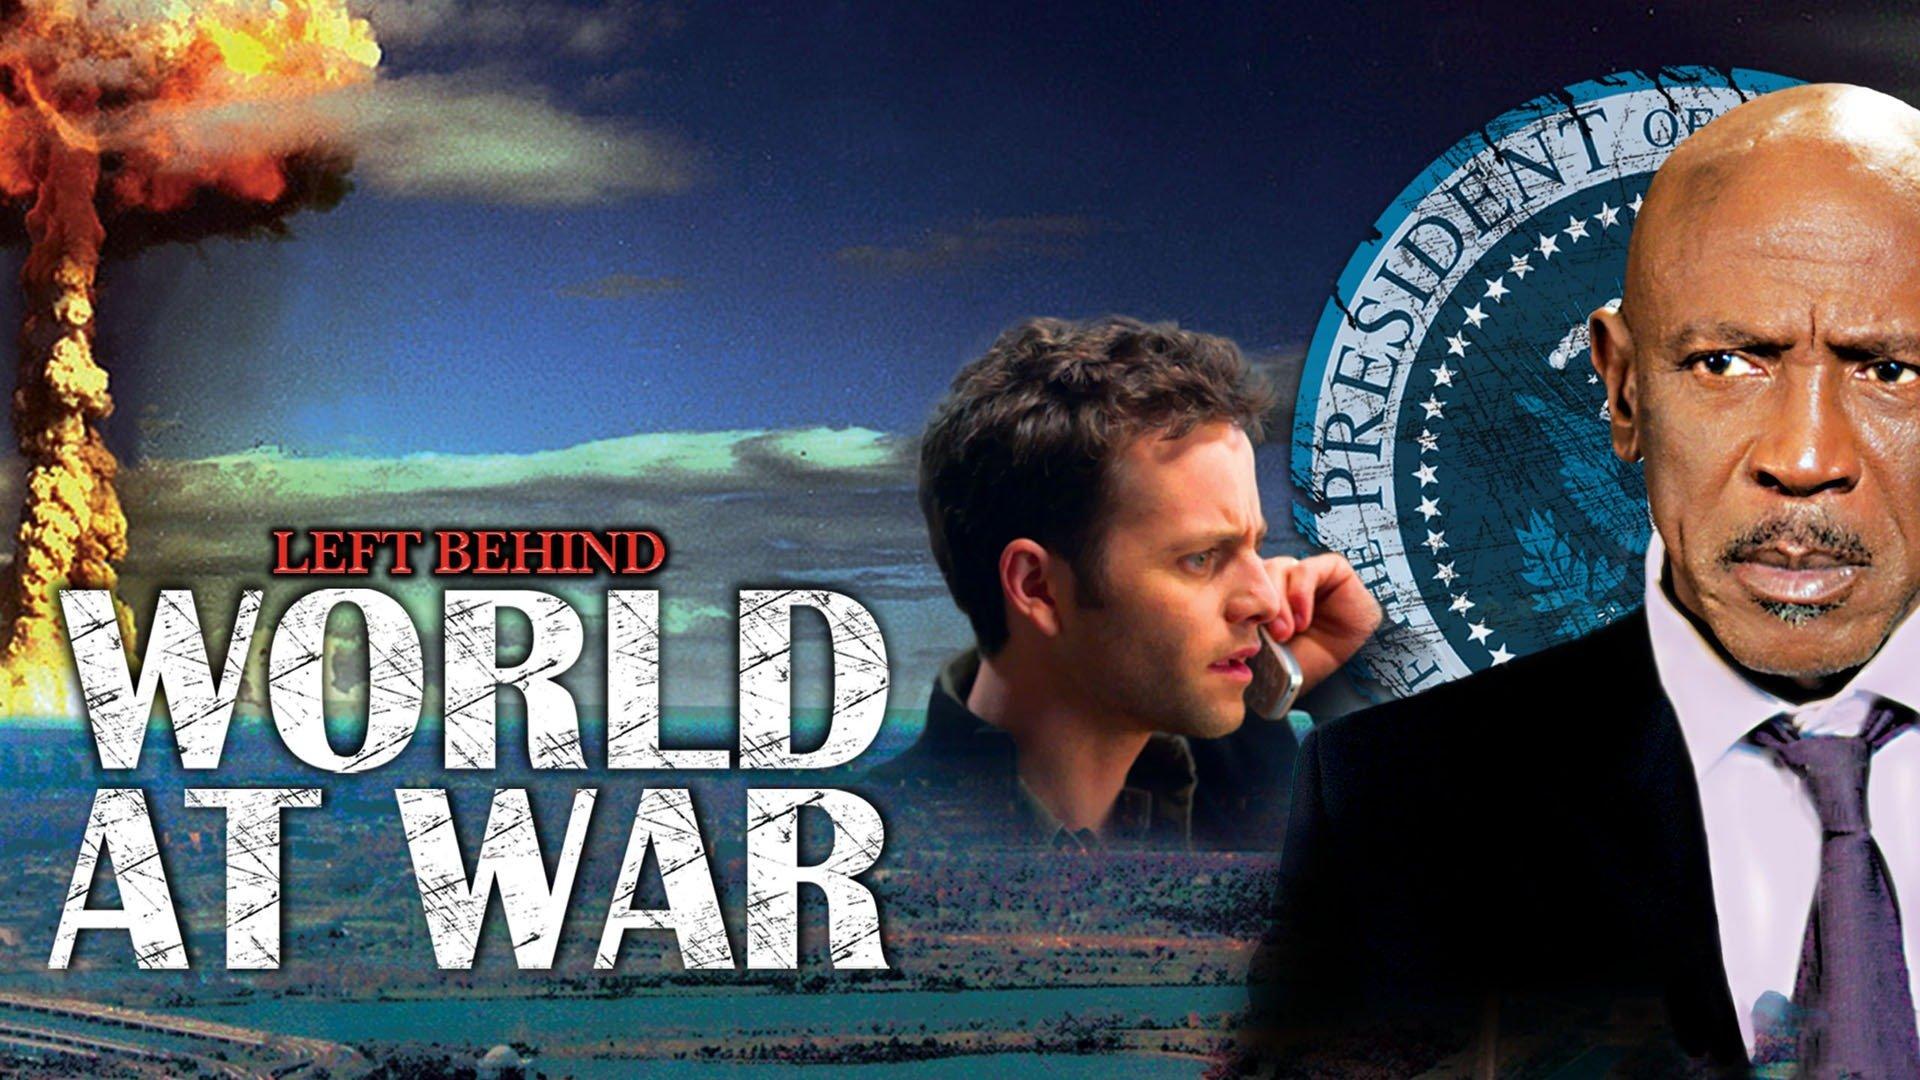 Watch Left Behind World at War Streaming Online on Philo (Free Trial)